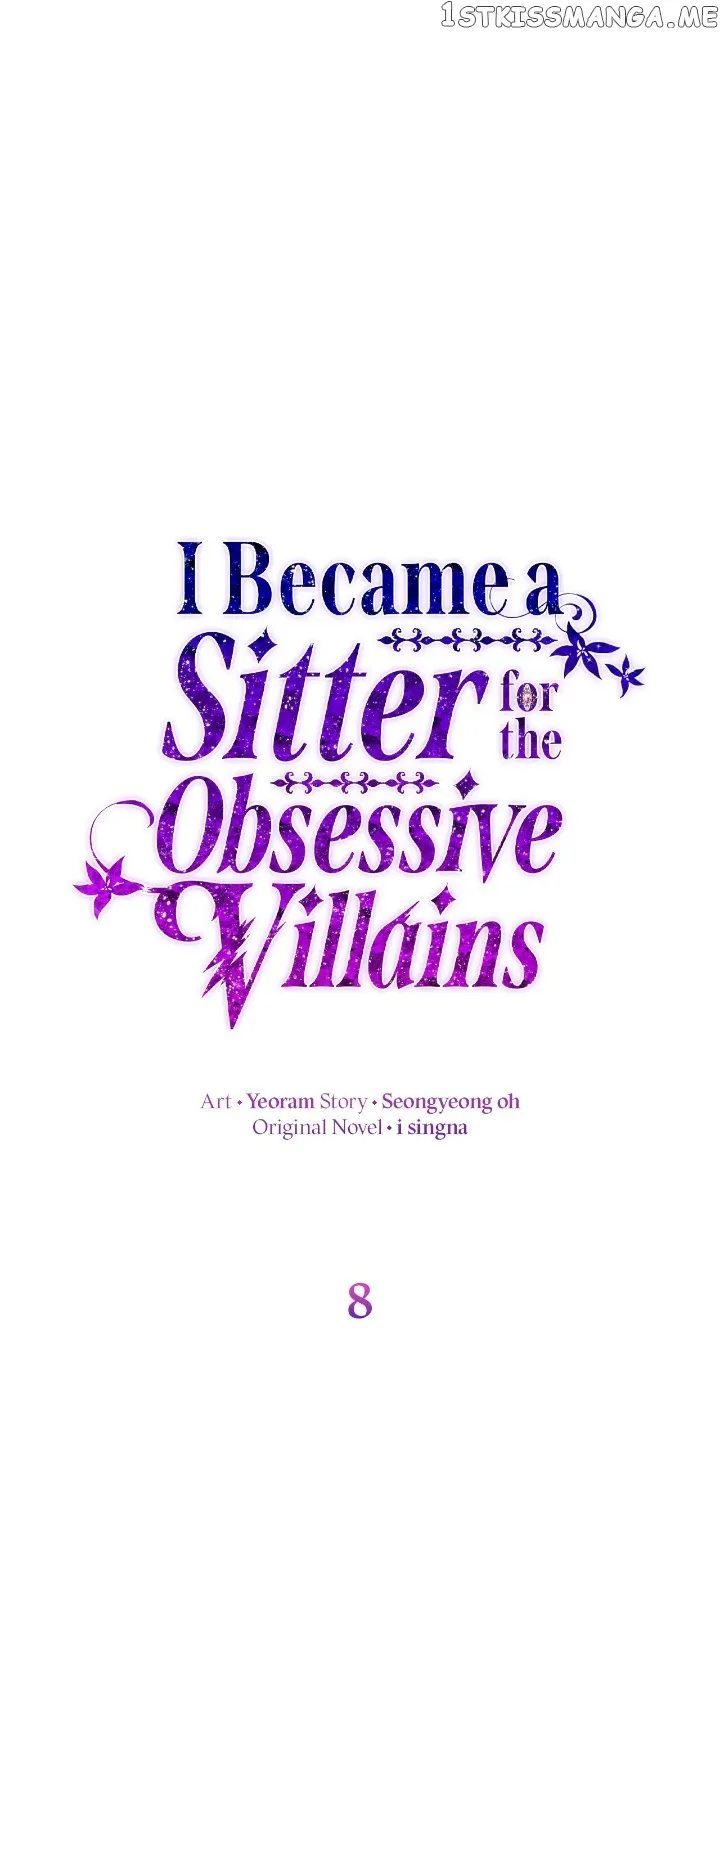 I Became a Sitter for the Obsessive Villains chapter 8